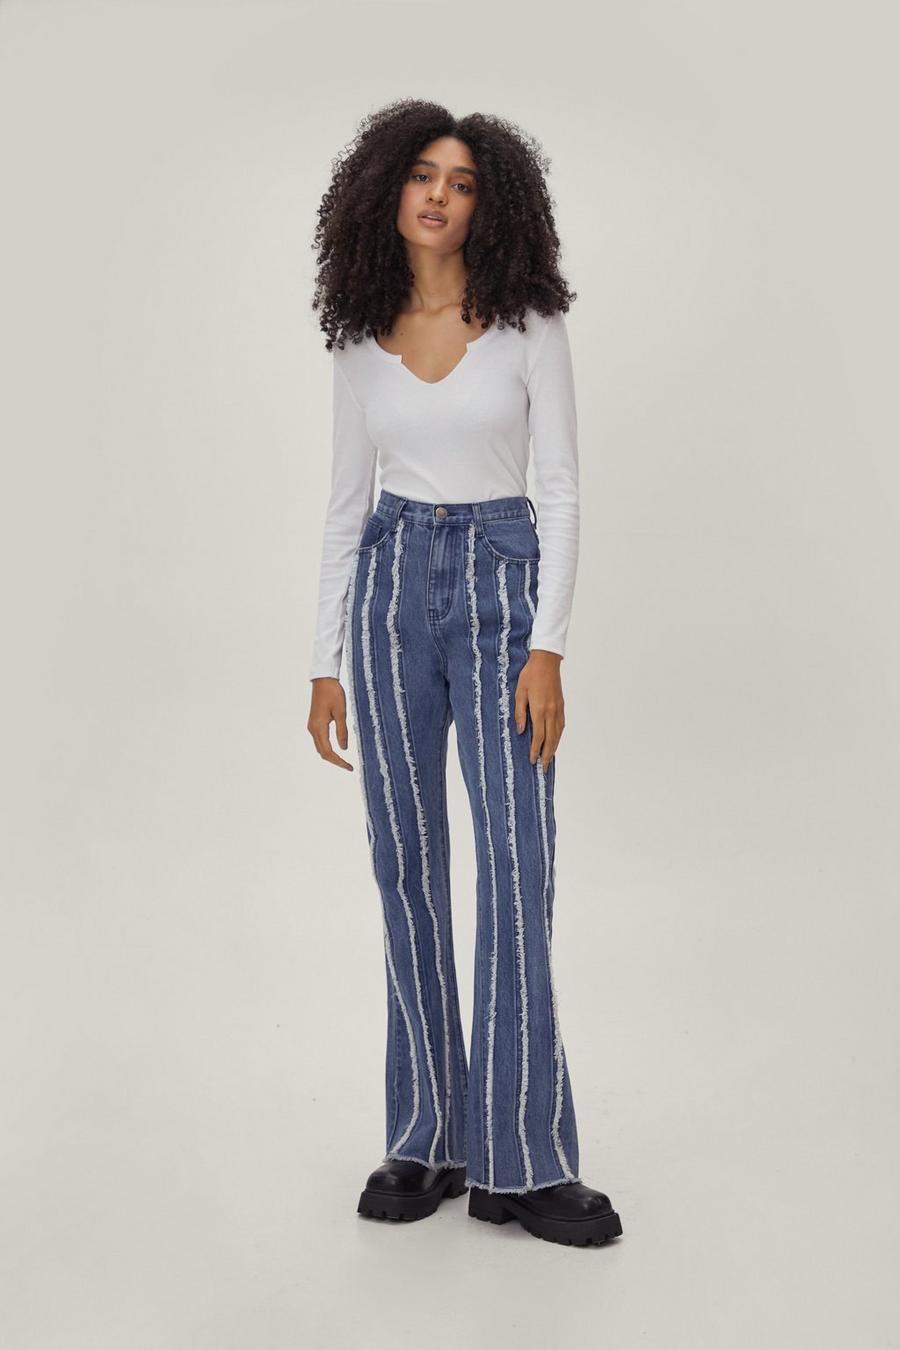 Denim Frayed Seam Fit and Flare Jeans